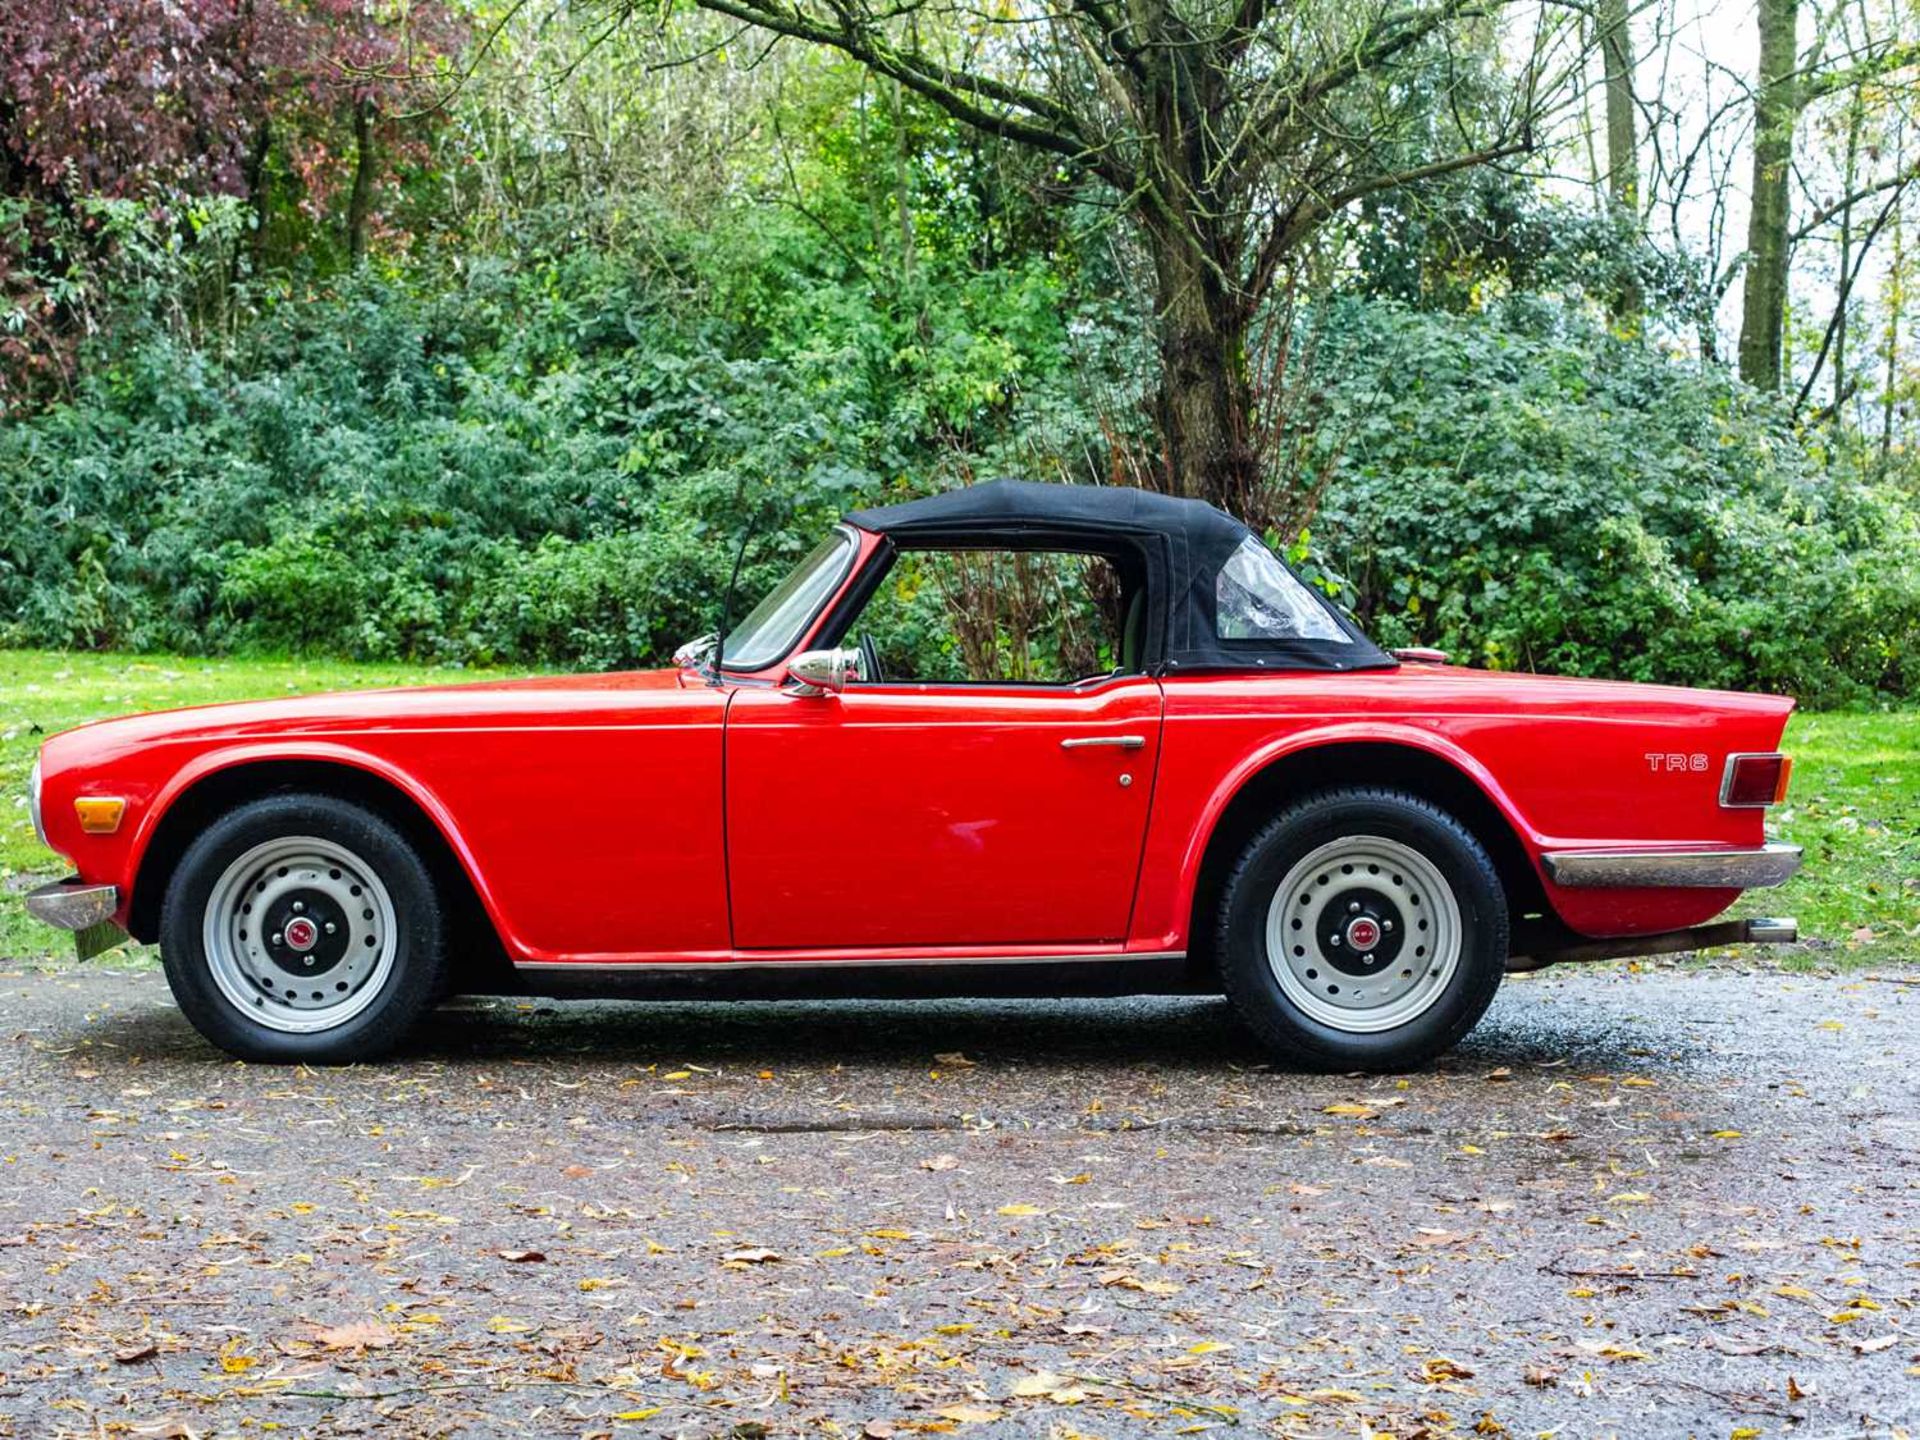 1969 Triumph TR6 Repatriated in 2020, converted to RHD and equipped with UK-specification SU carbure - Image 7 of 53